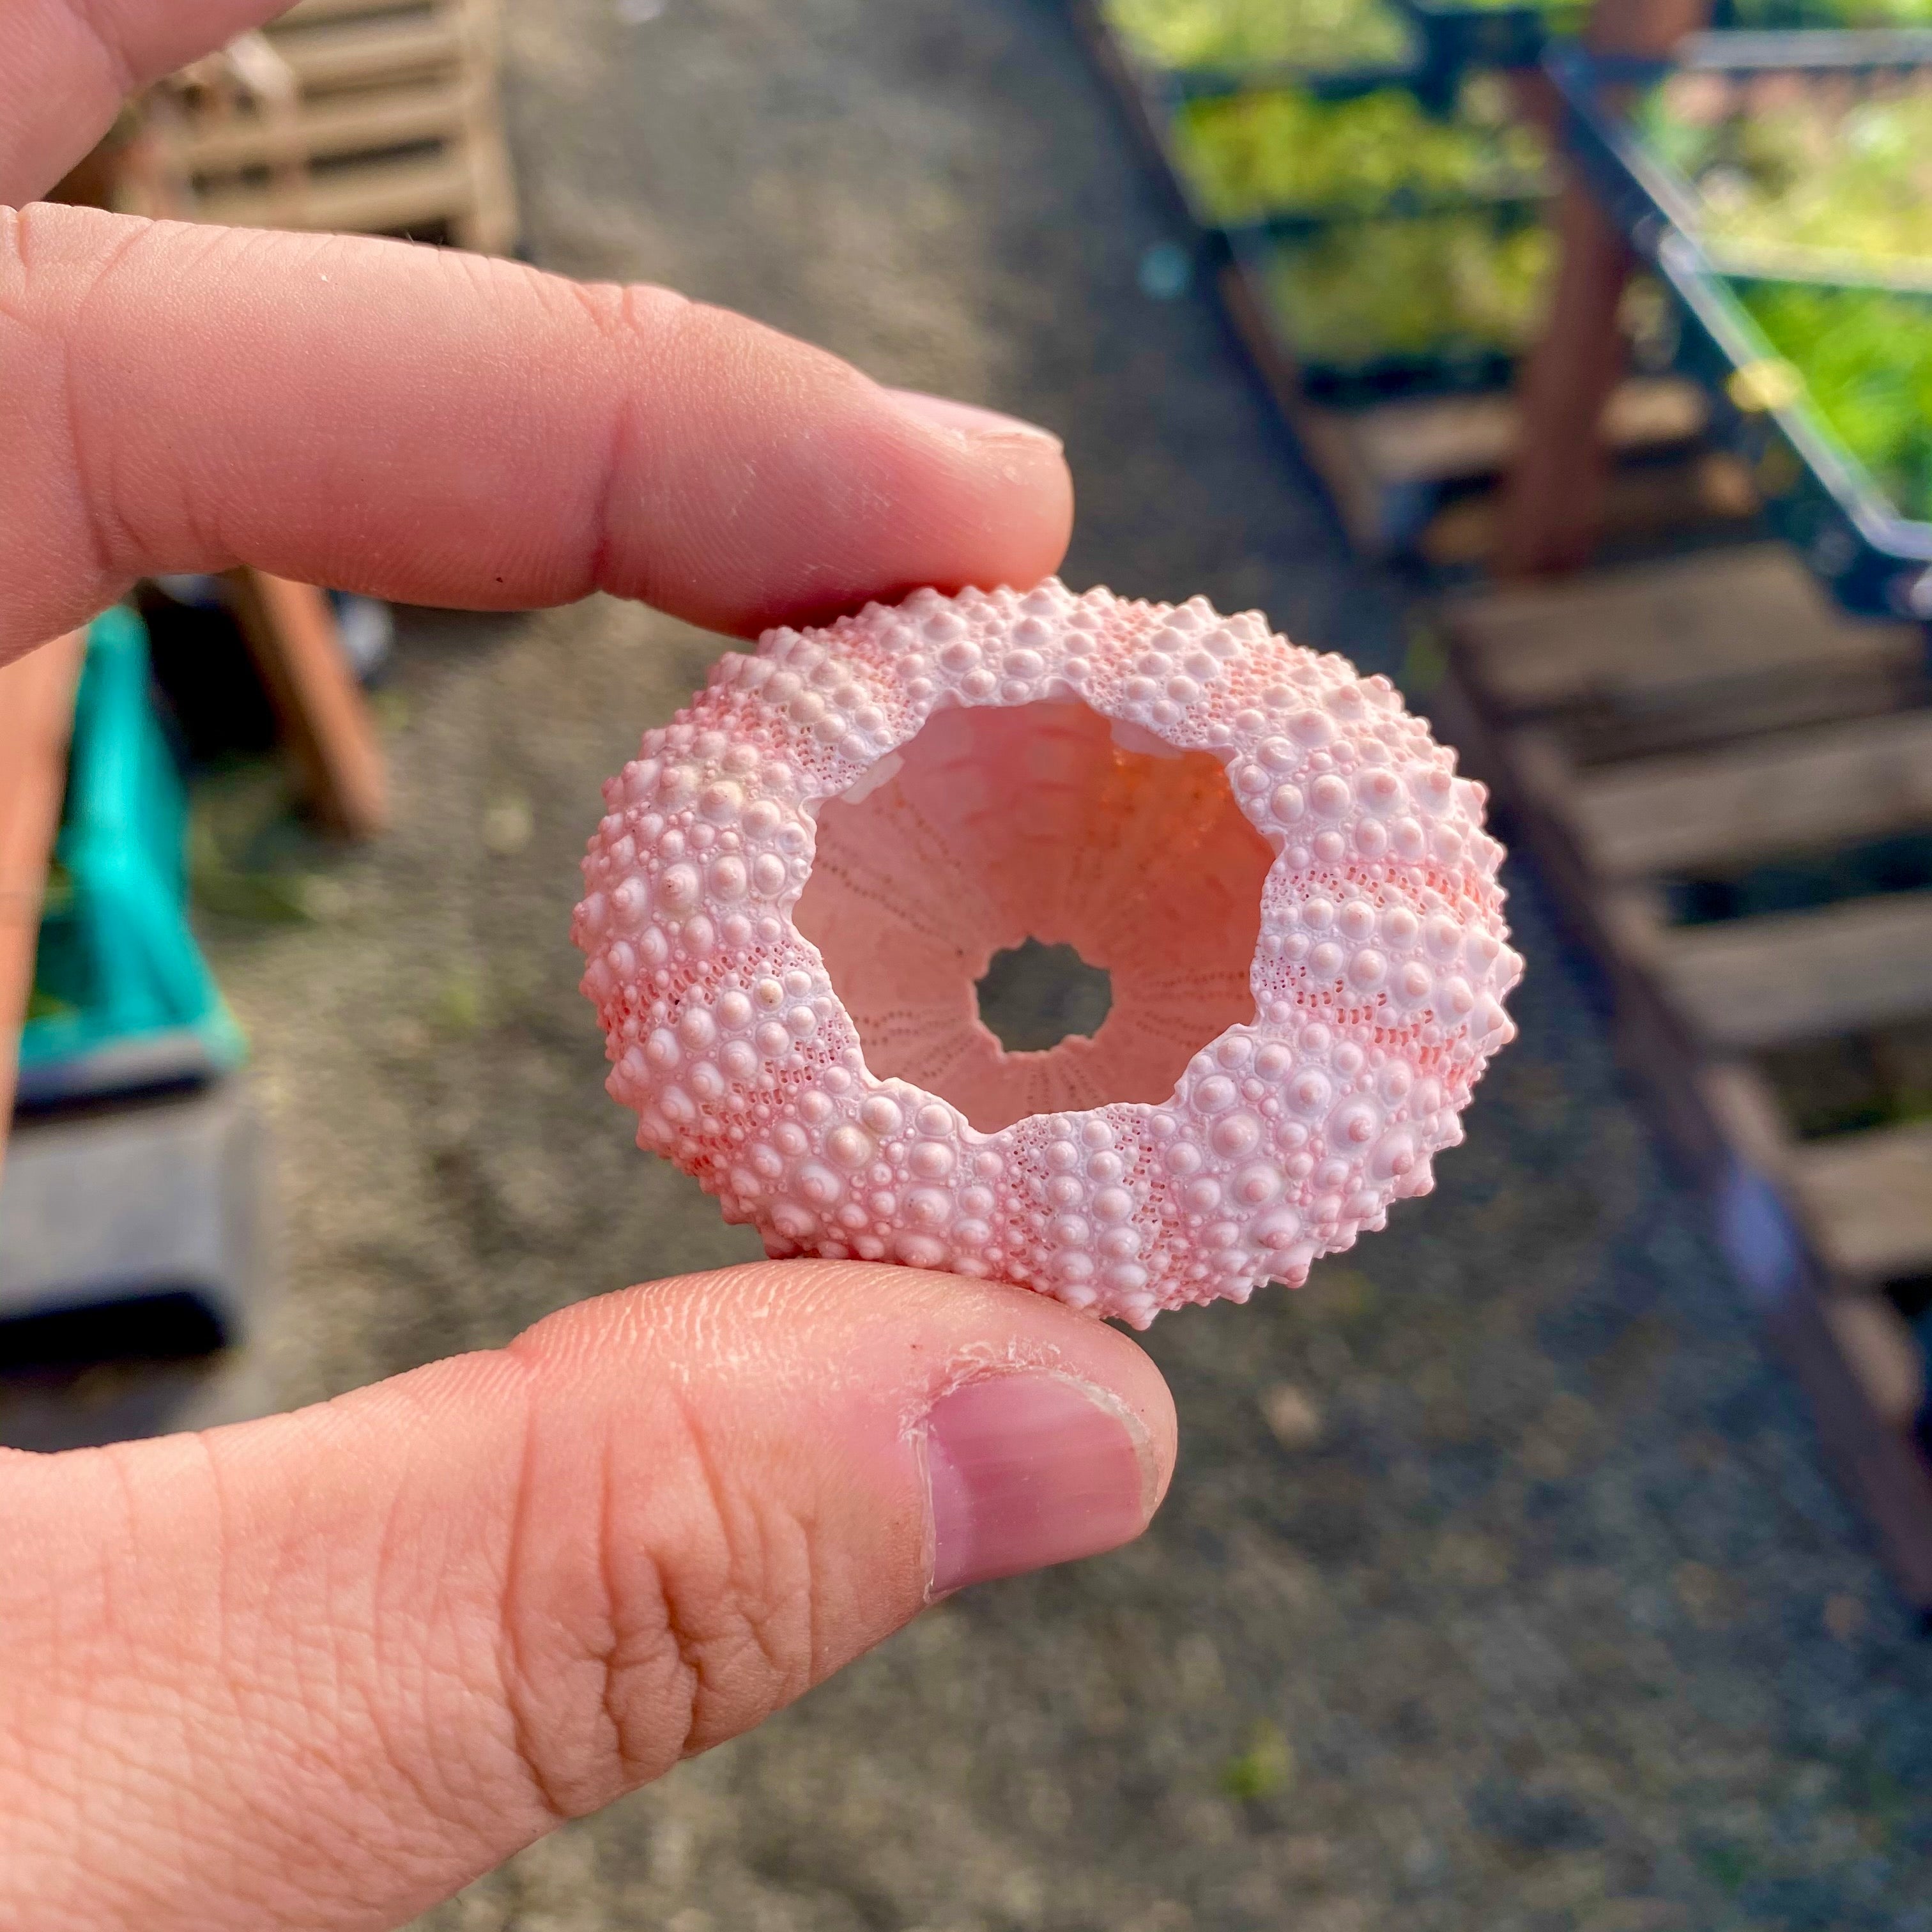 Pink/White Sea Urchin Shell <br> (Buy 3 and Save)